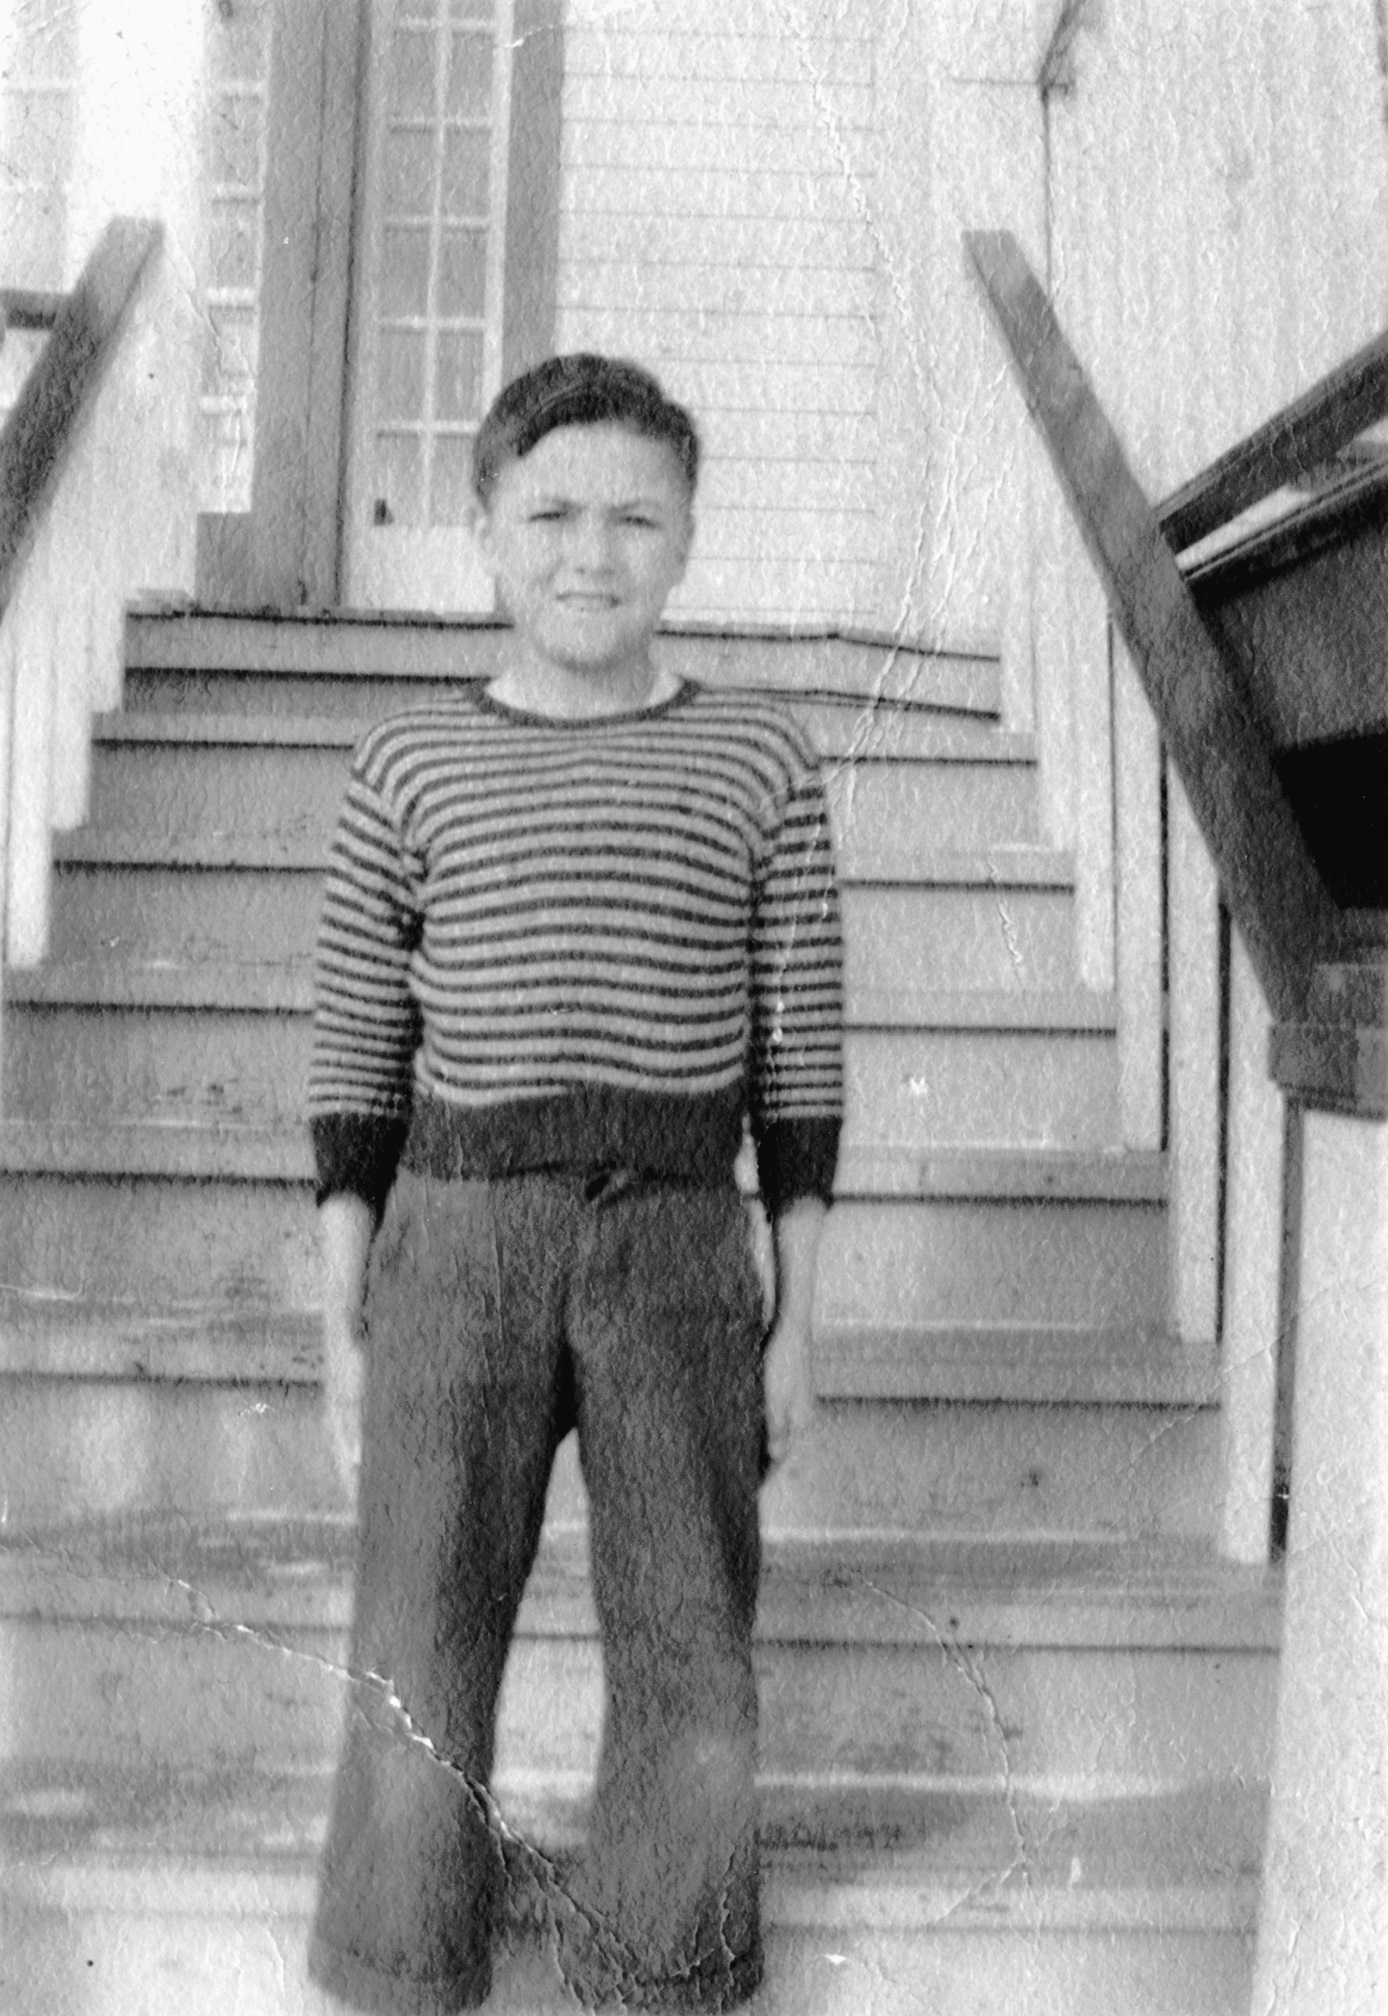 Black and white photograph of a child standing on outdoor stairs leading up to a door.